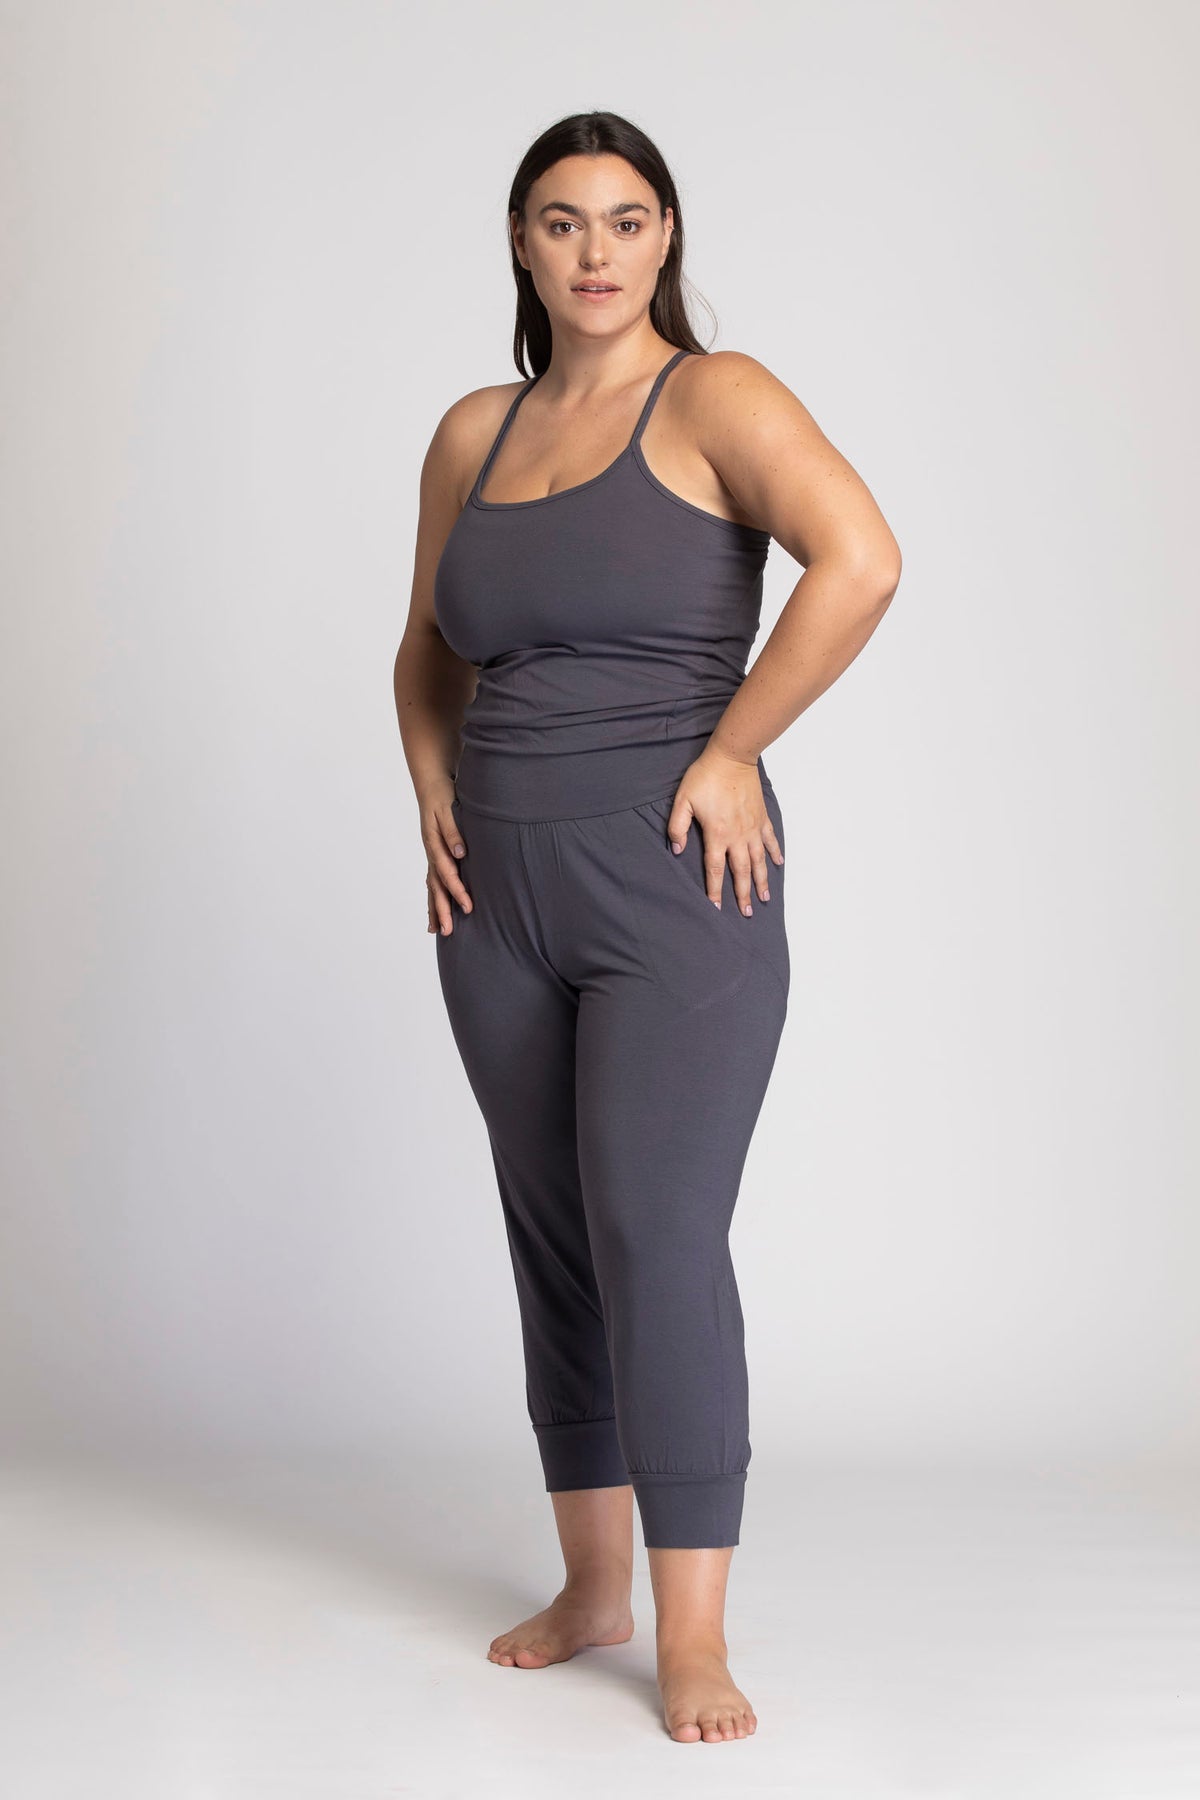 50%off I’mPerfect Organic Cotton Yoga Jumpsuit was 35%off